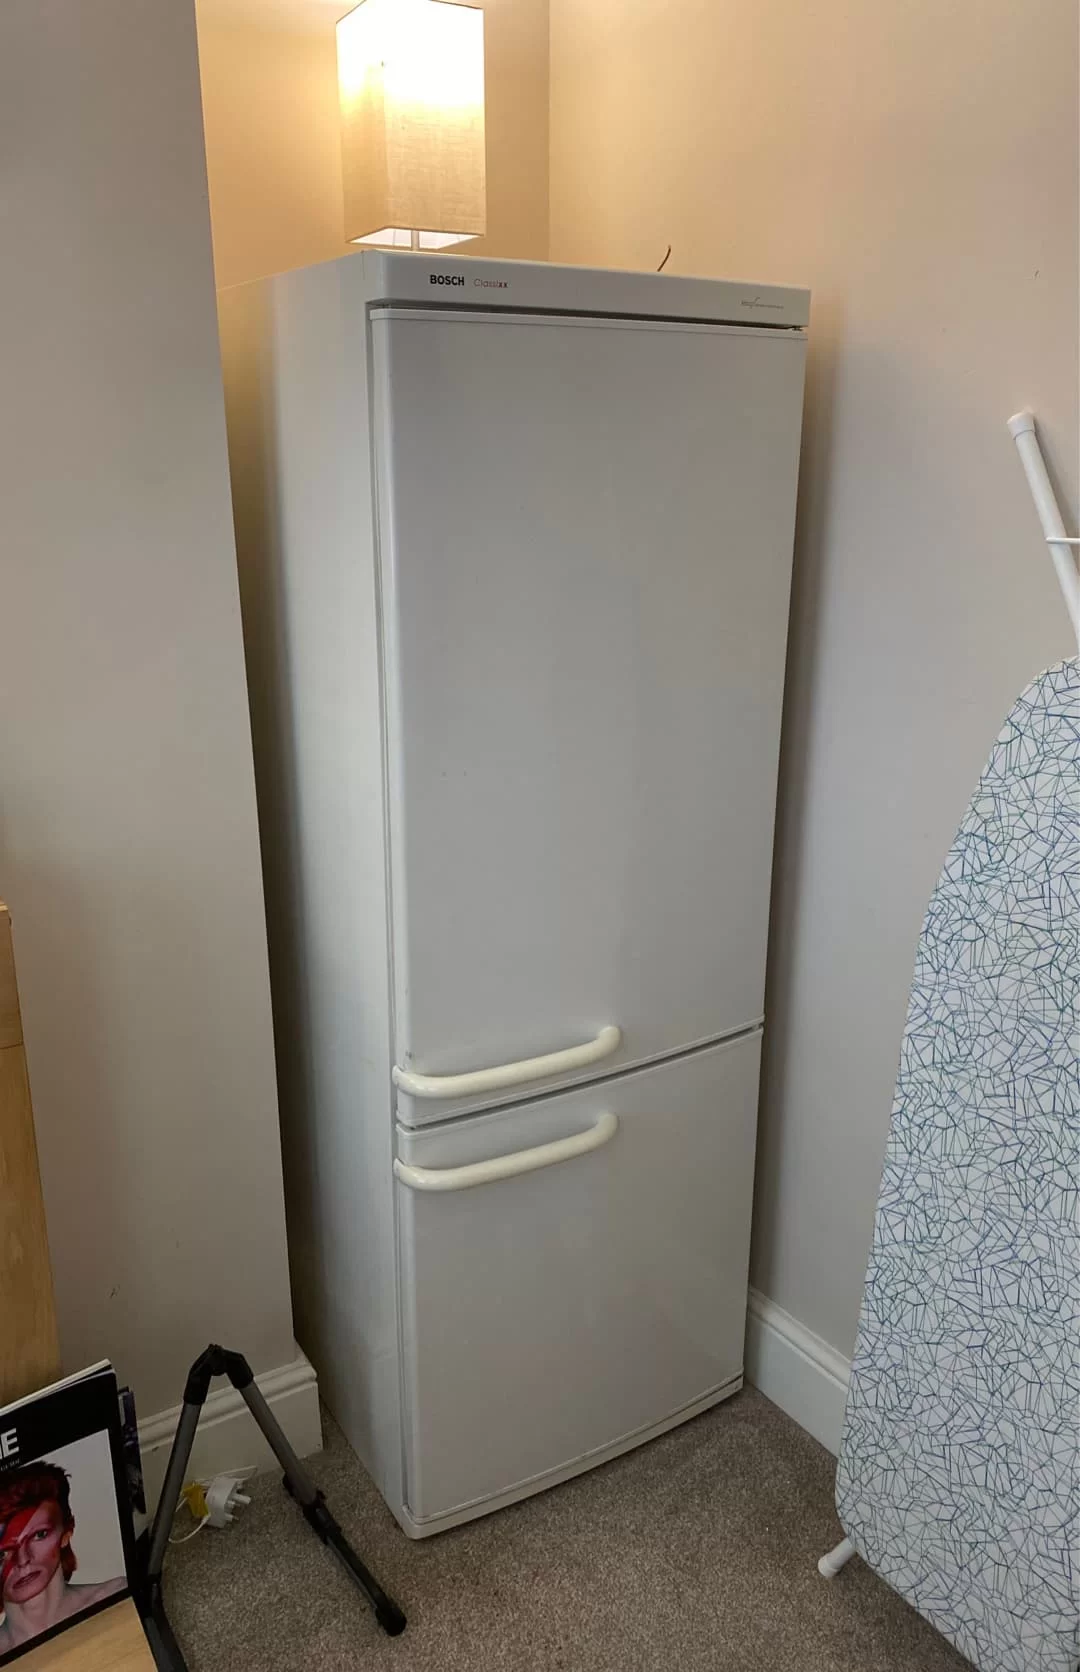 large fridge being collected for £50 fee